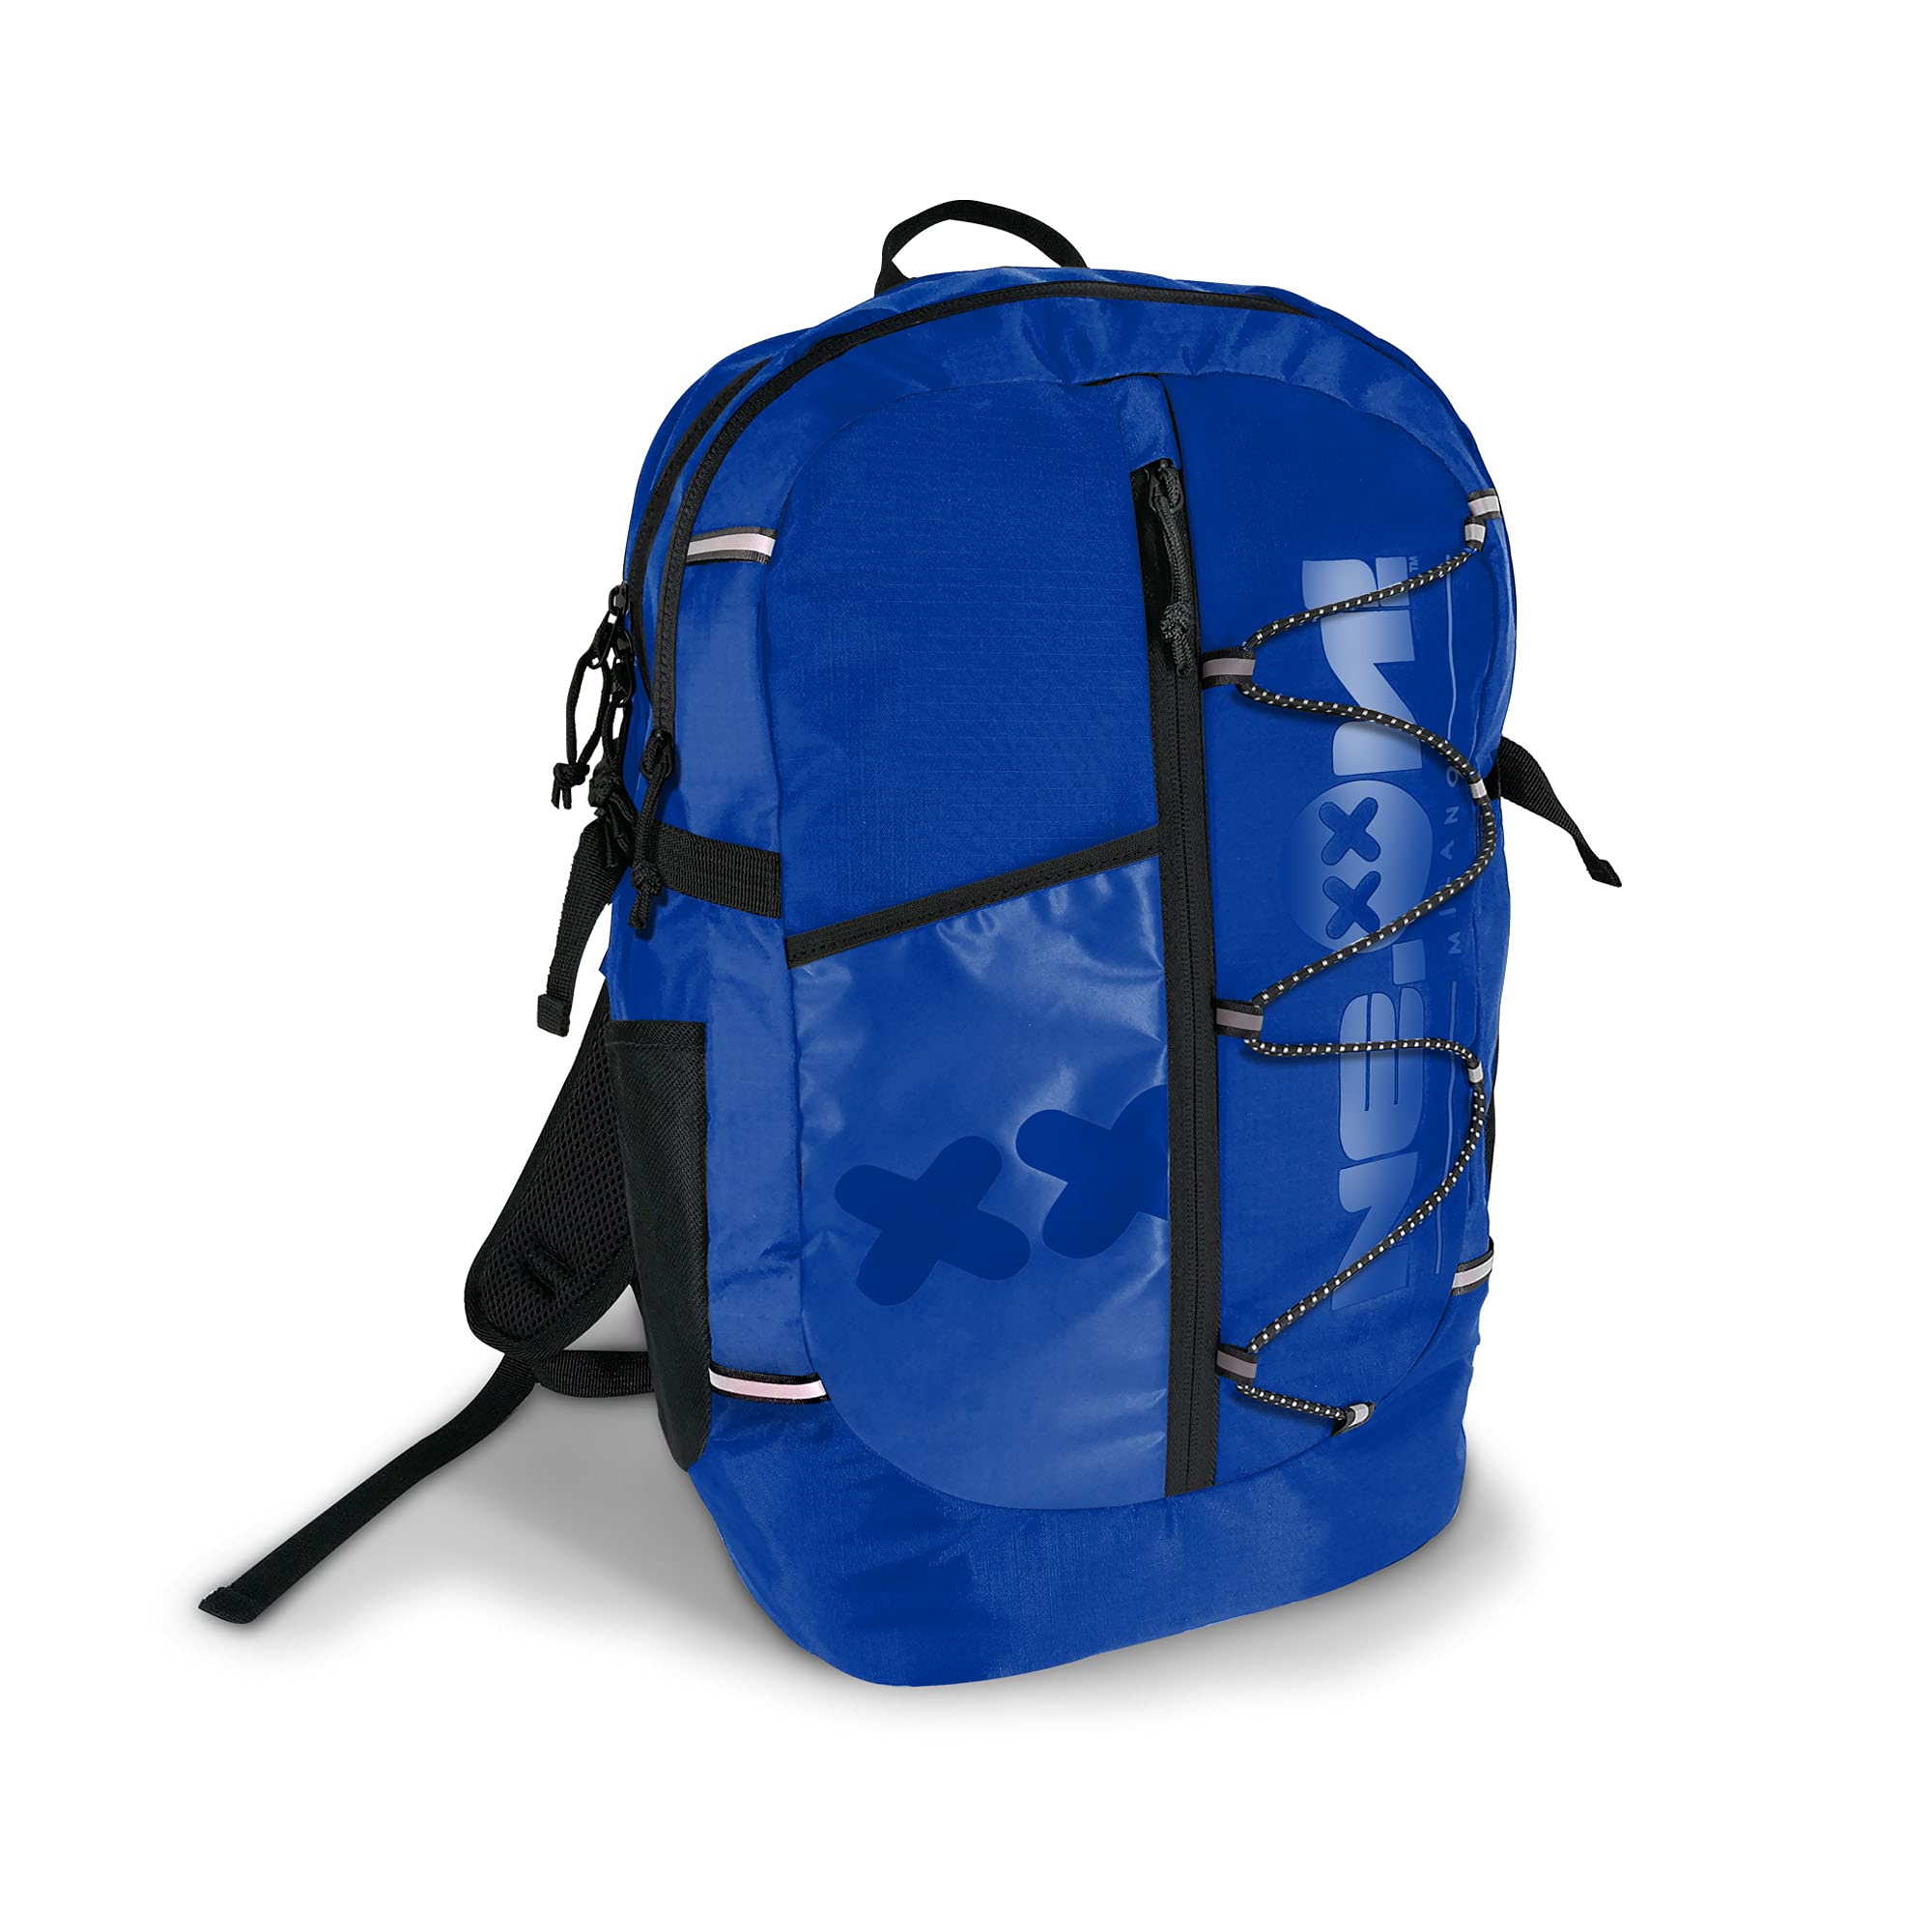 NEW CARRY BACKPACK BLUE